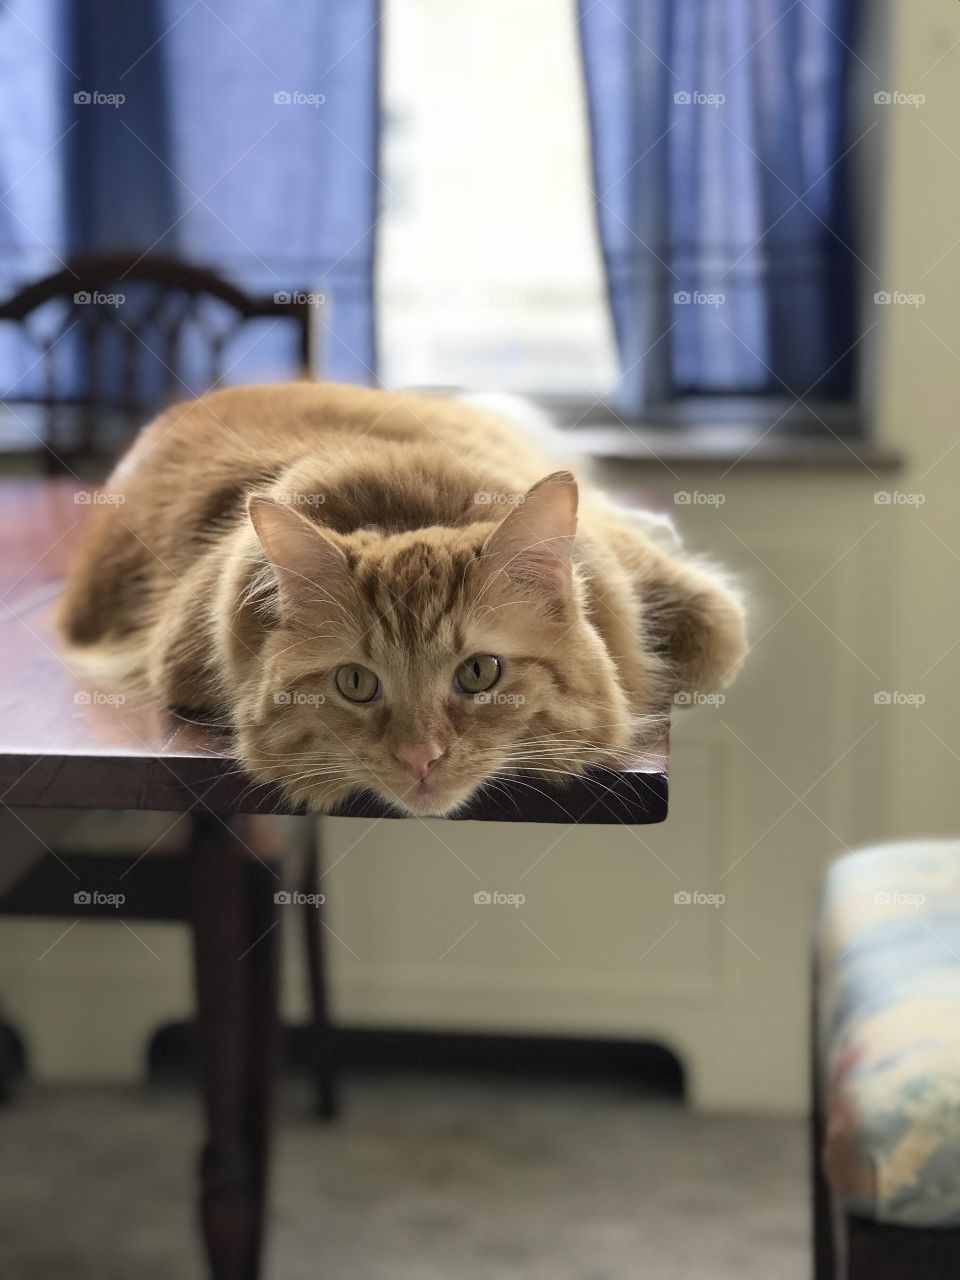 Cute Maine coon cat on a table head down